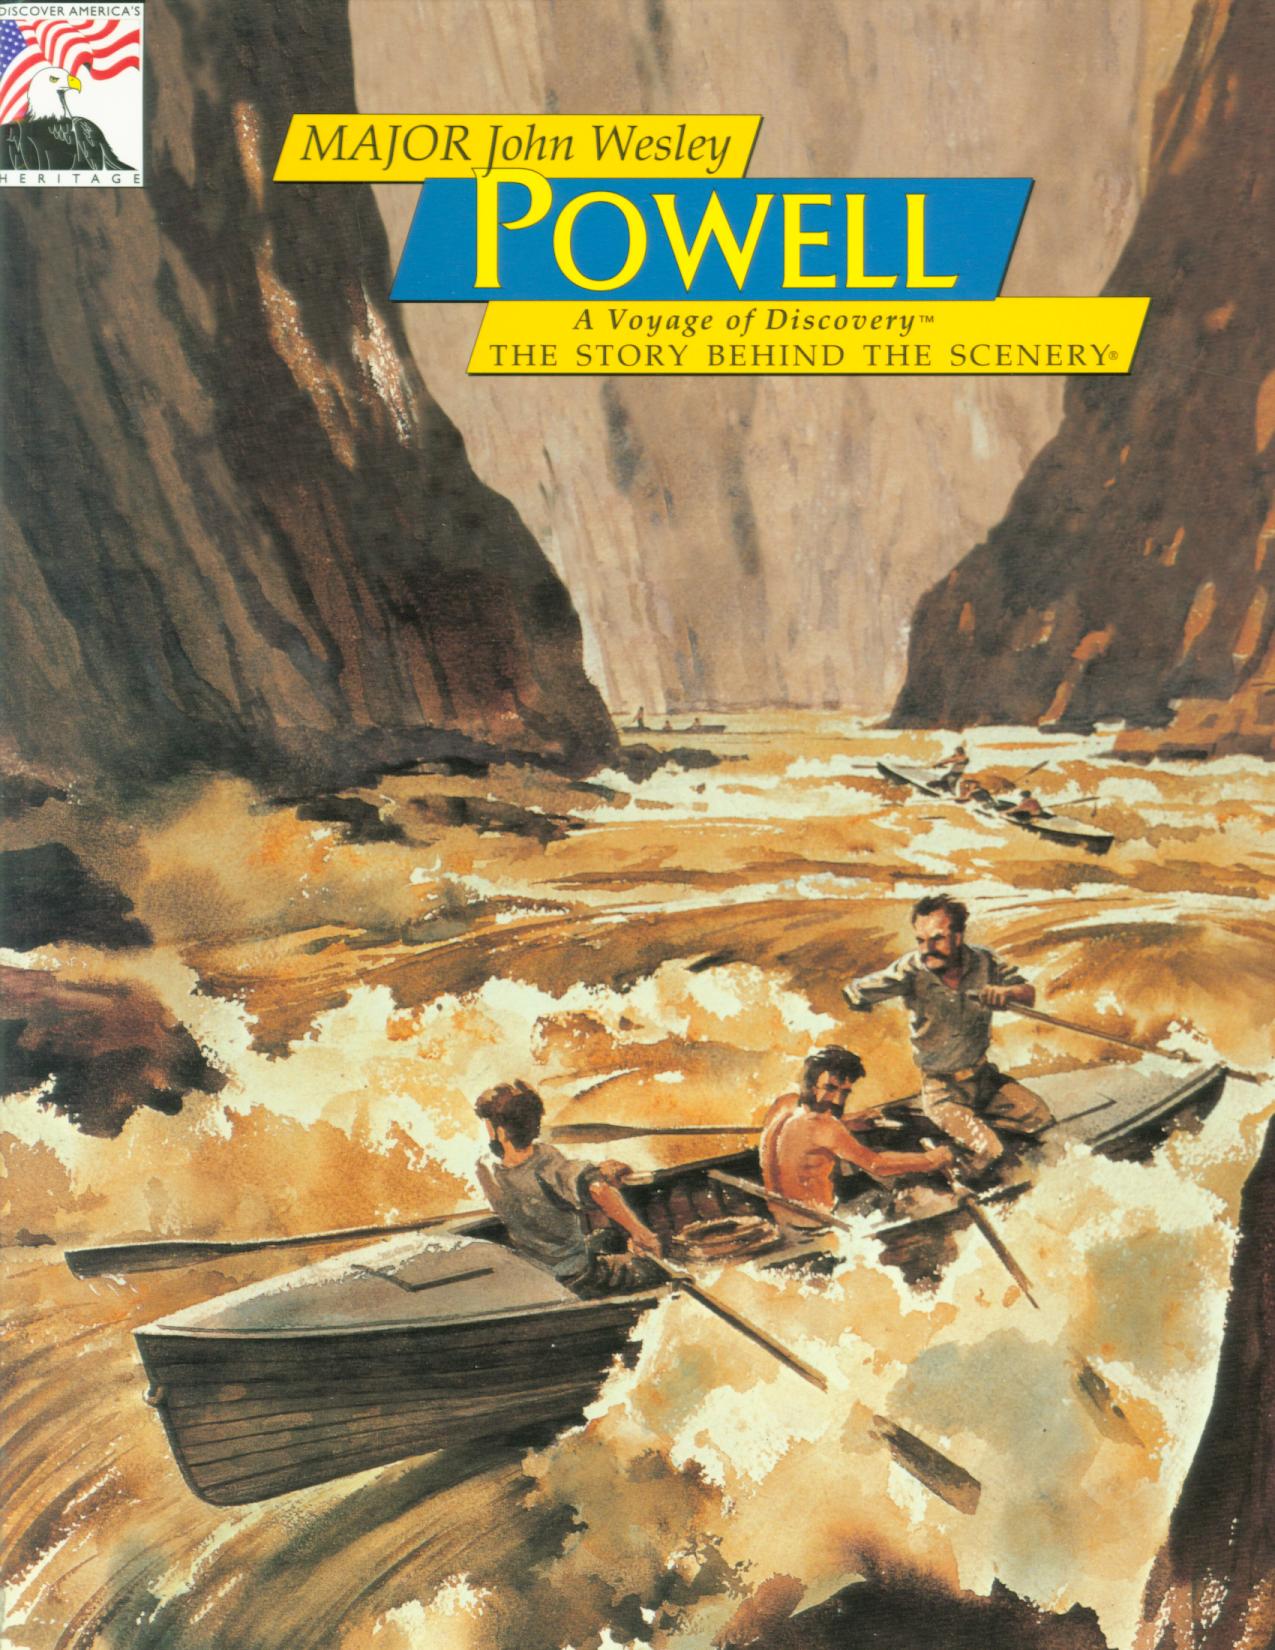 MAJOR JOHN WESLEY POWELL: voyage of discovery--the story behind the scenery (WY/UT/AZ). 